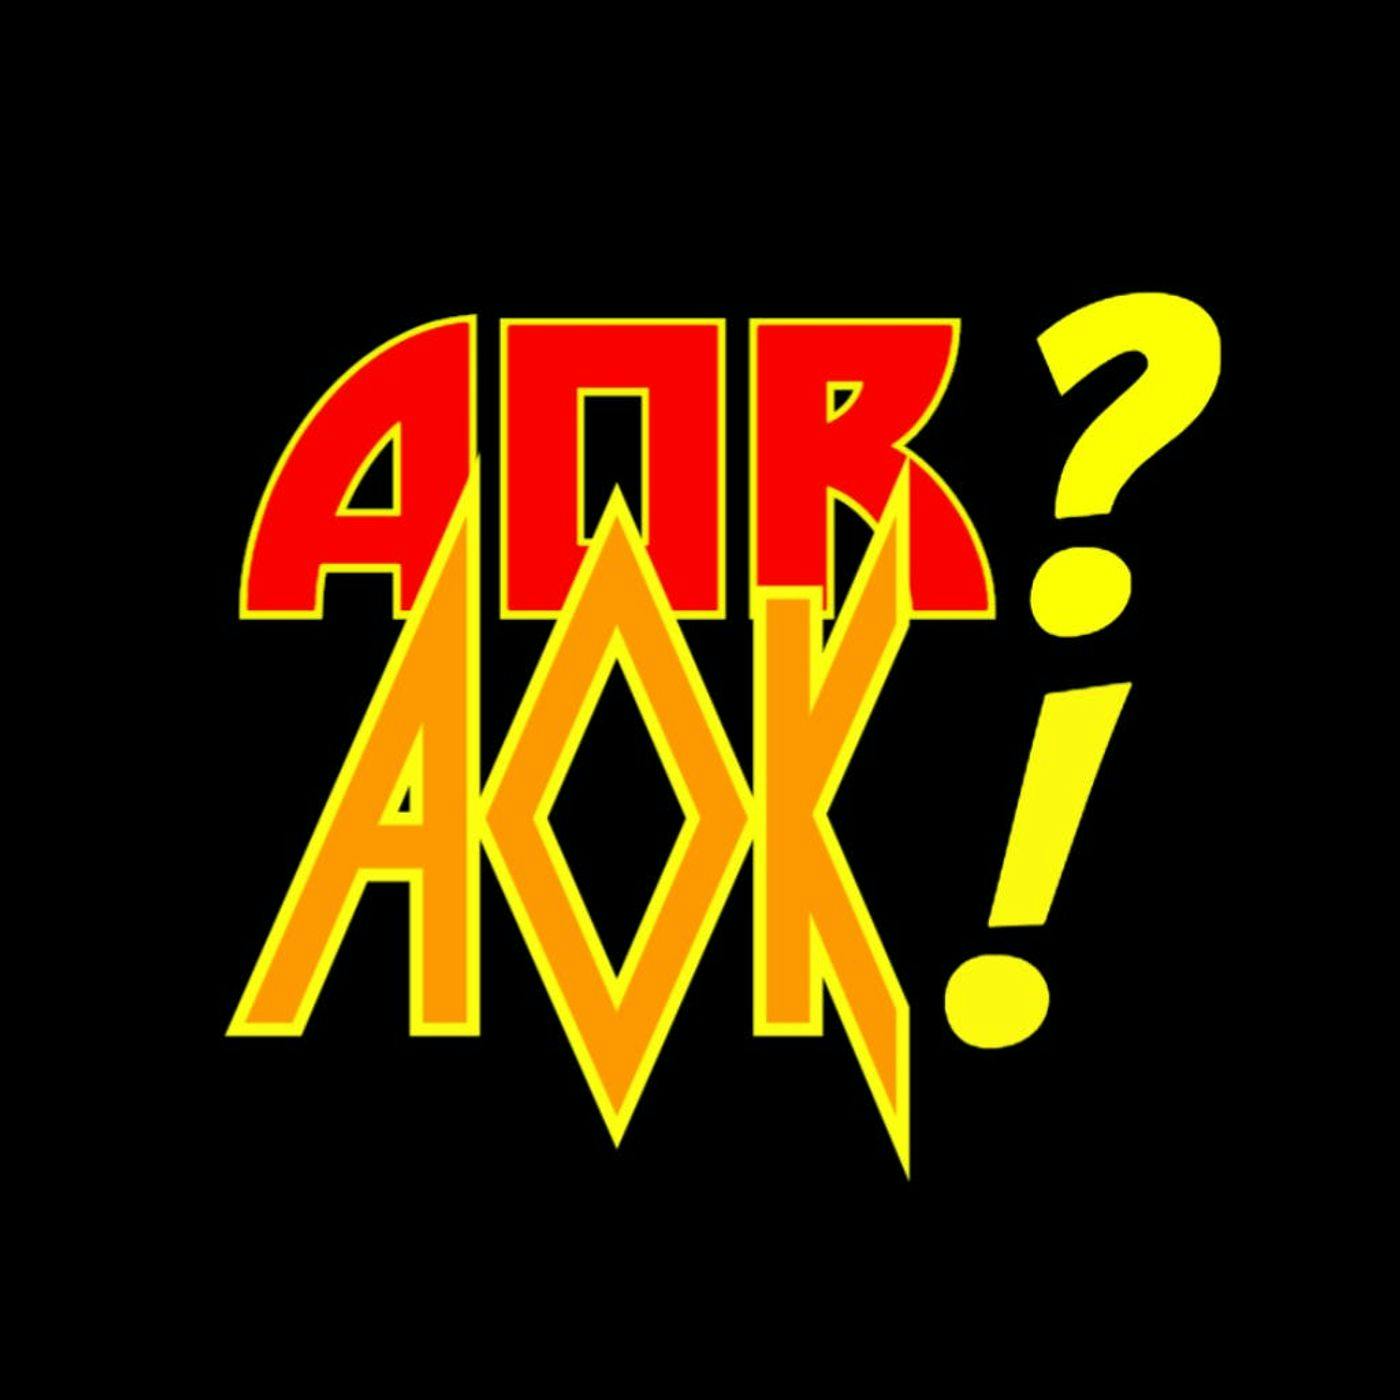 RA/OR IS BACK! IT'S THE RETURN OF AOR? AOK!